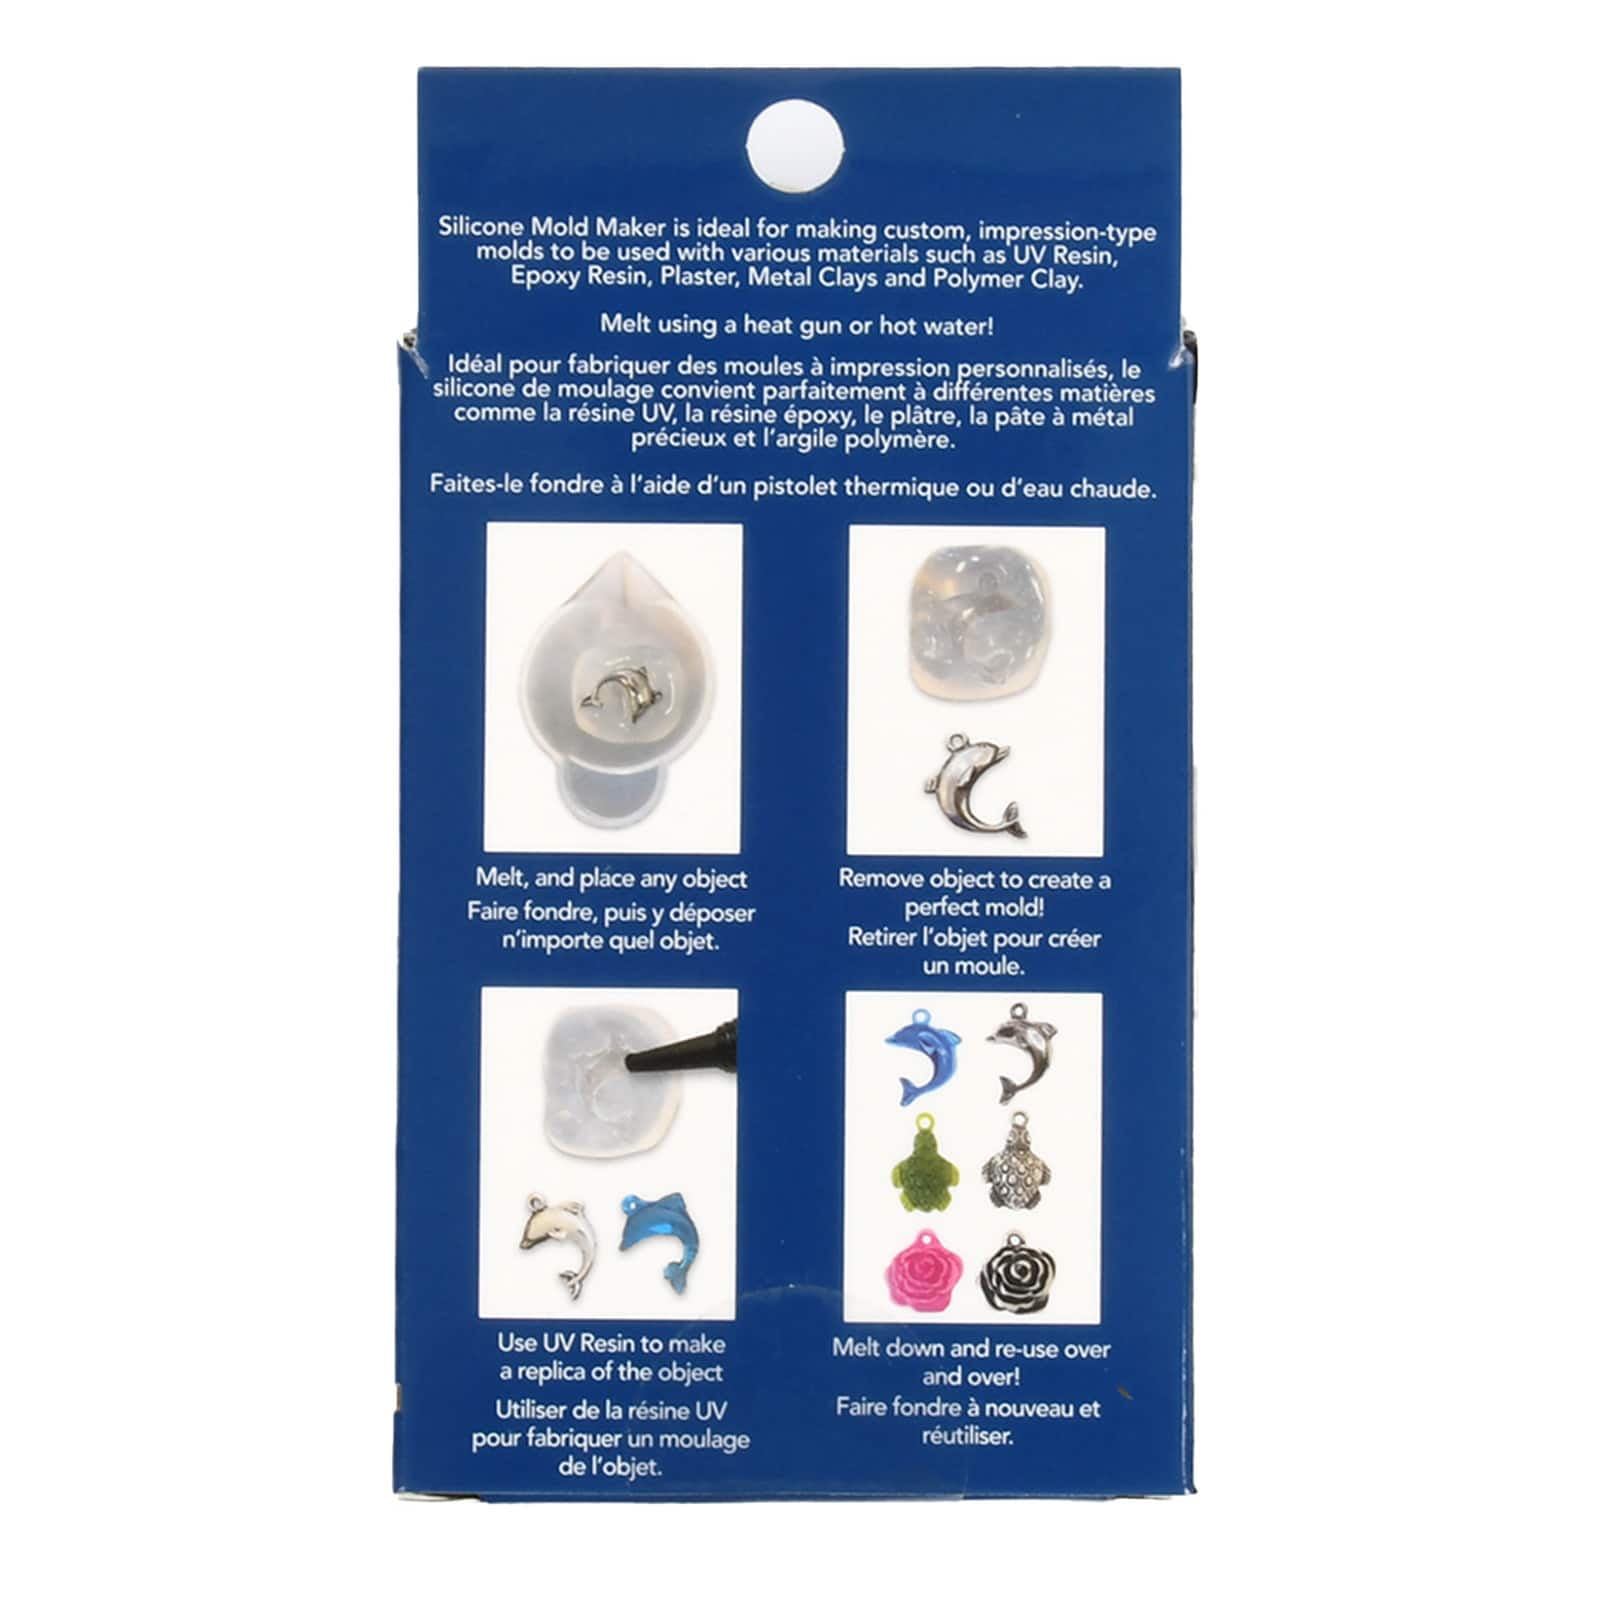 12 Pack: Blue Moon Studio™ UV Resin Craft Connectors Silicone Mold 